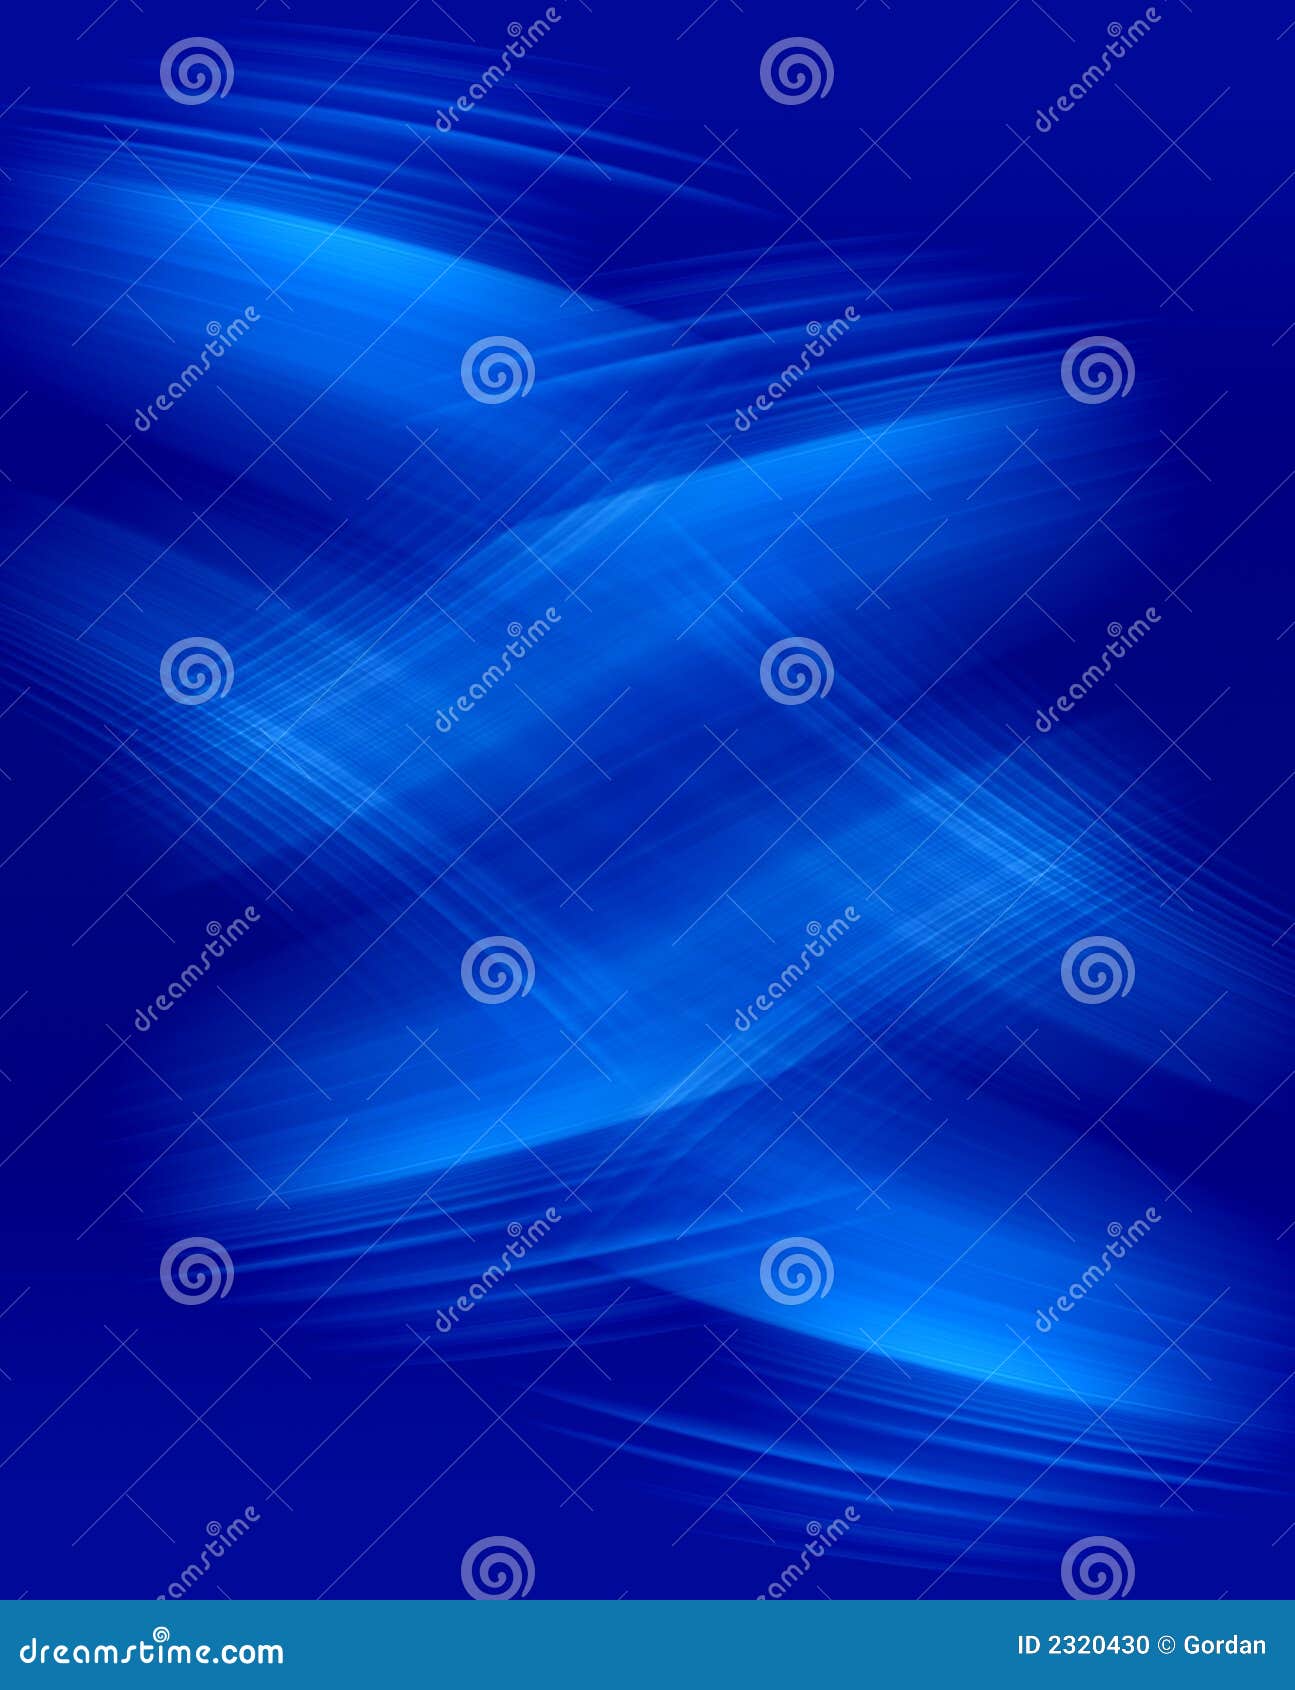 Abstract background stock illustration. Illustration of abstraction